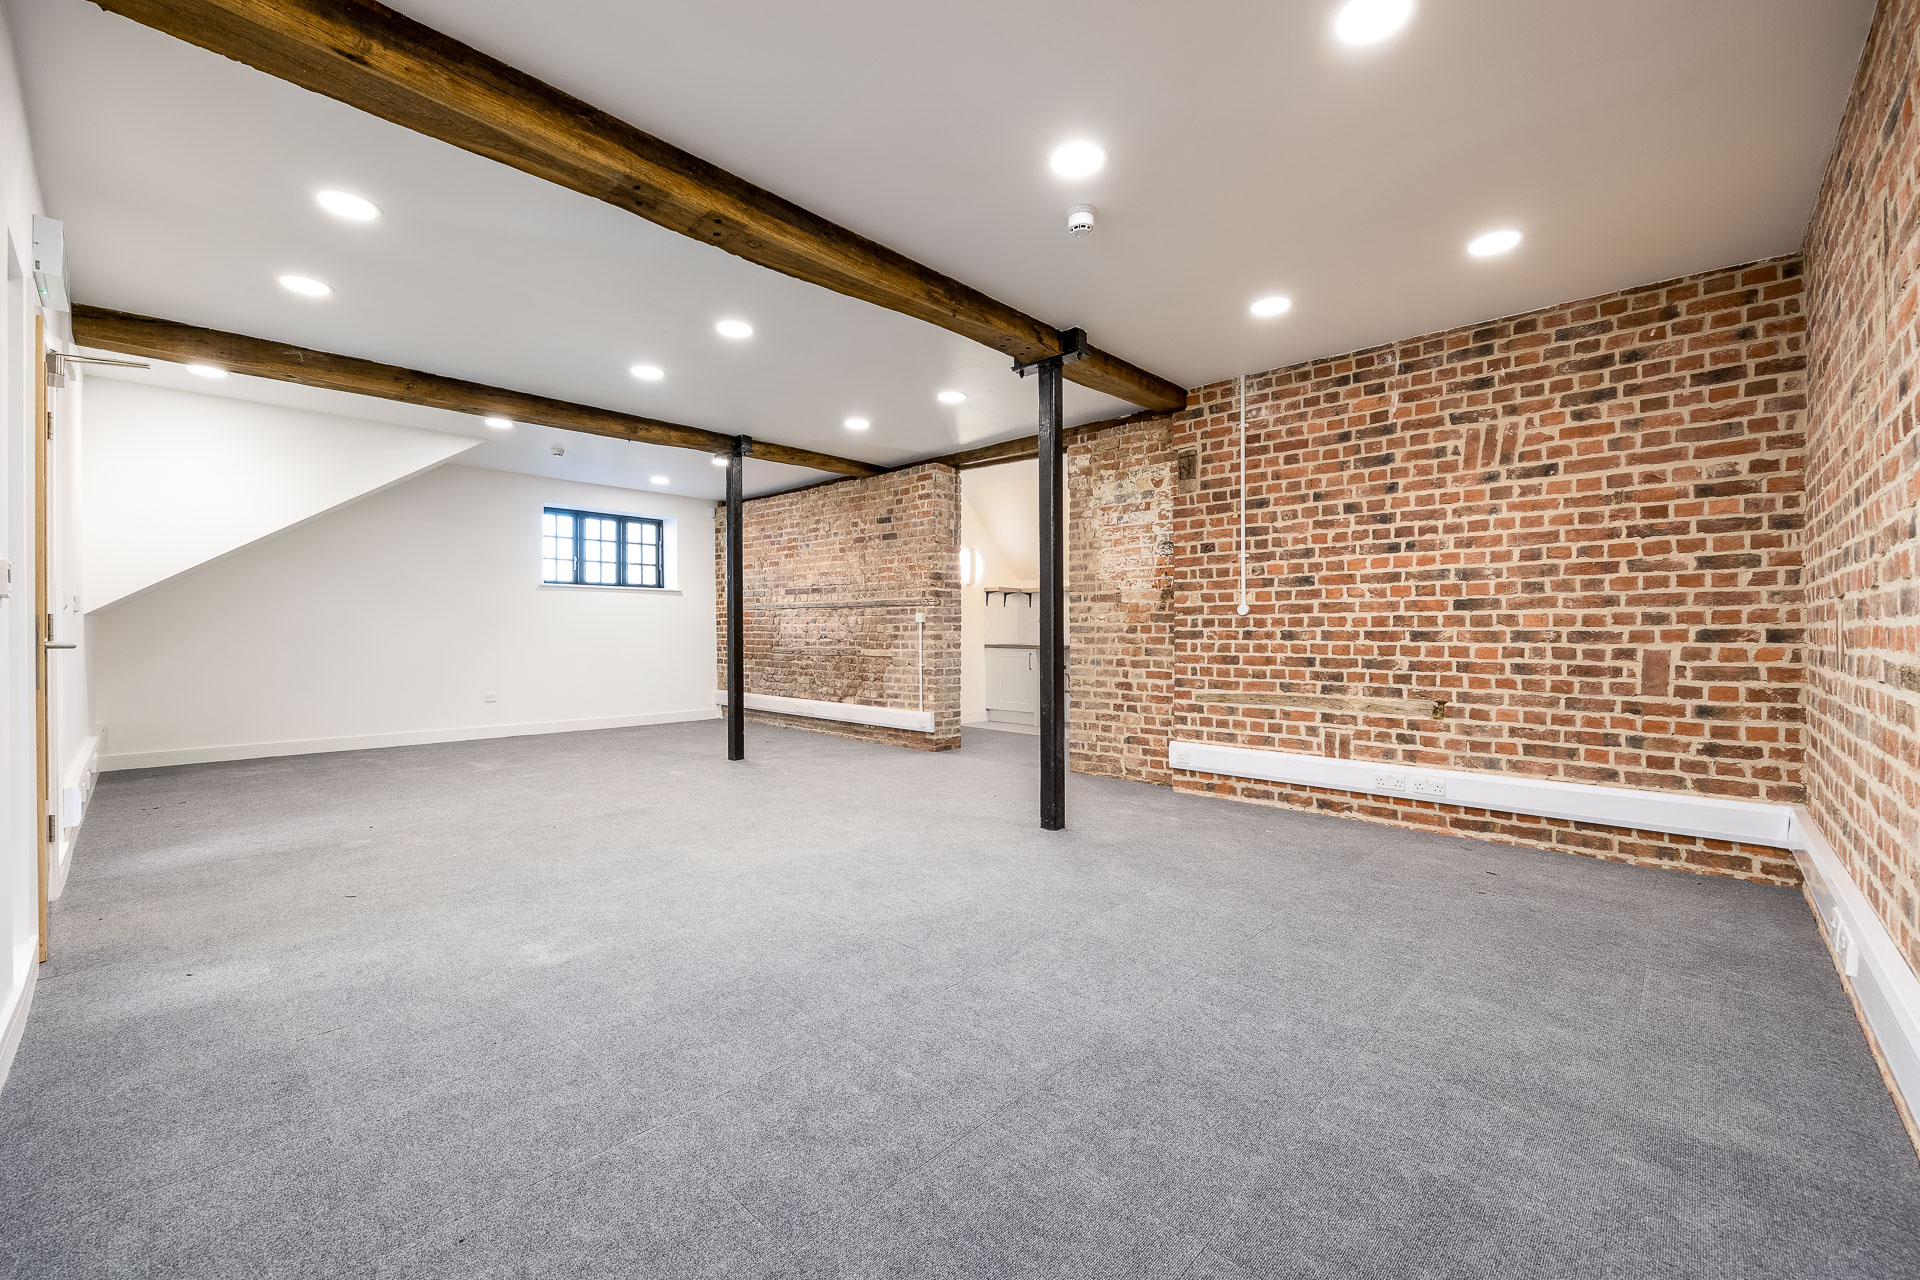 An empty room with brick walls and a ceiling, creating a rustic and minimalistic ambiance at Hard to Find Farm.